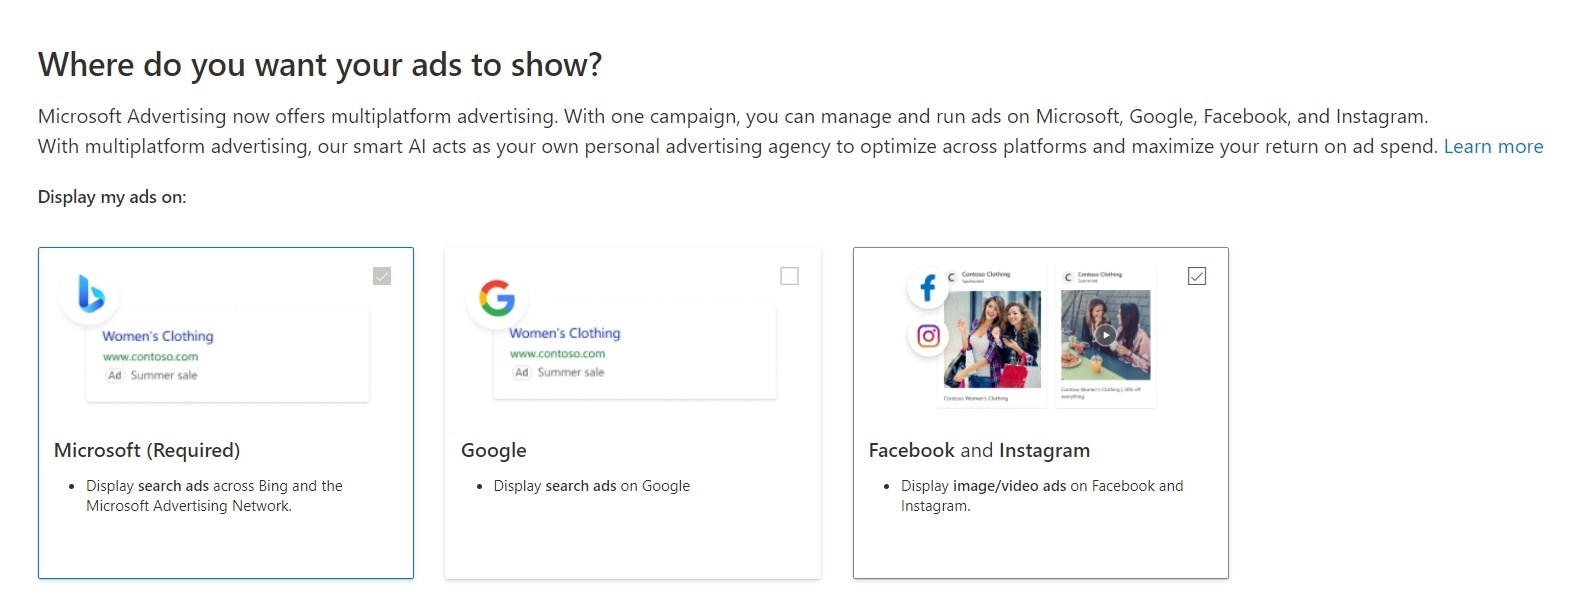 Microsoft ads placement for Bing search ads